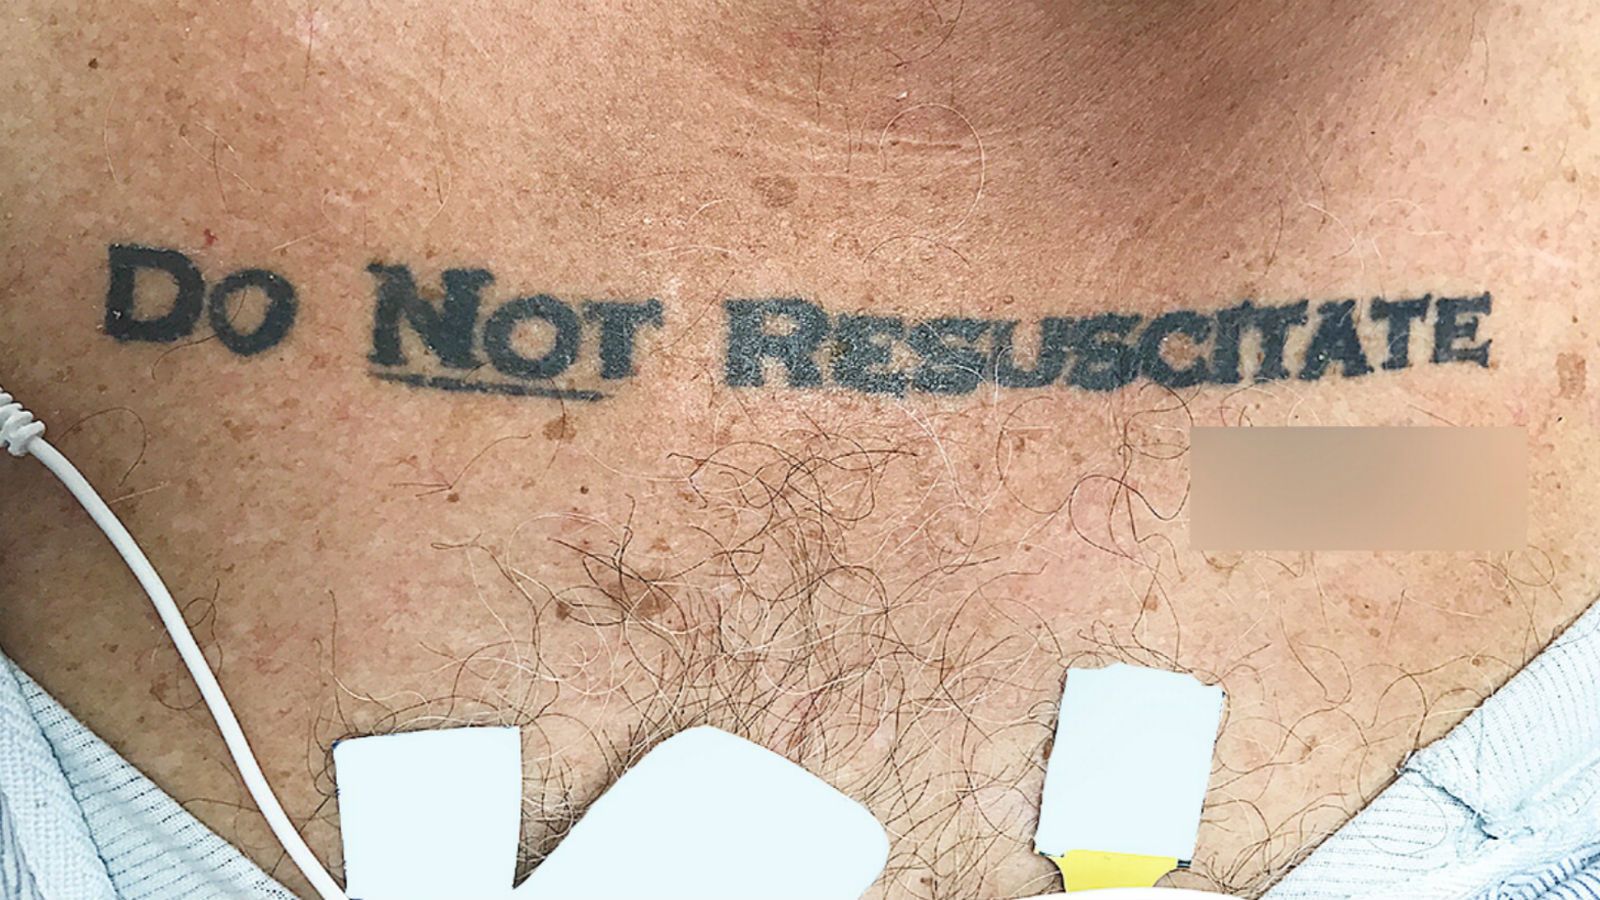 A man's 'Do not resuscitate' tattoo left doctors debating whether to save  his life | CNN